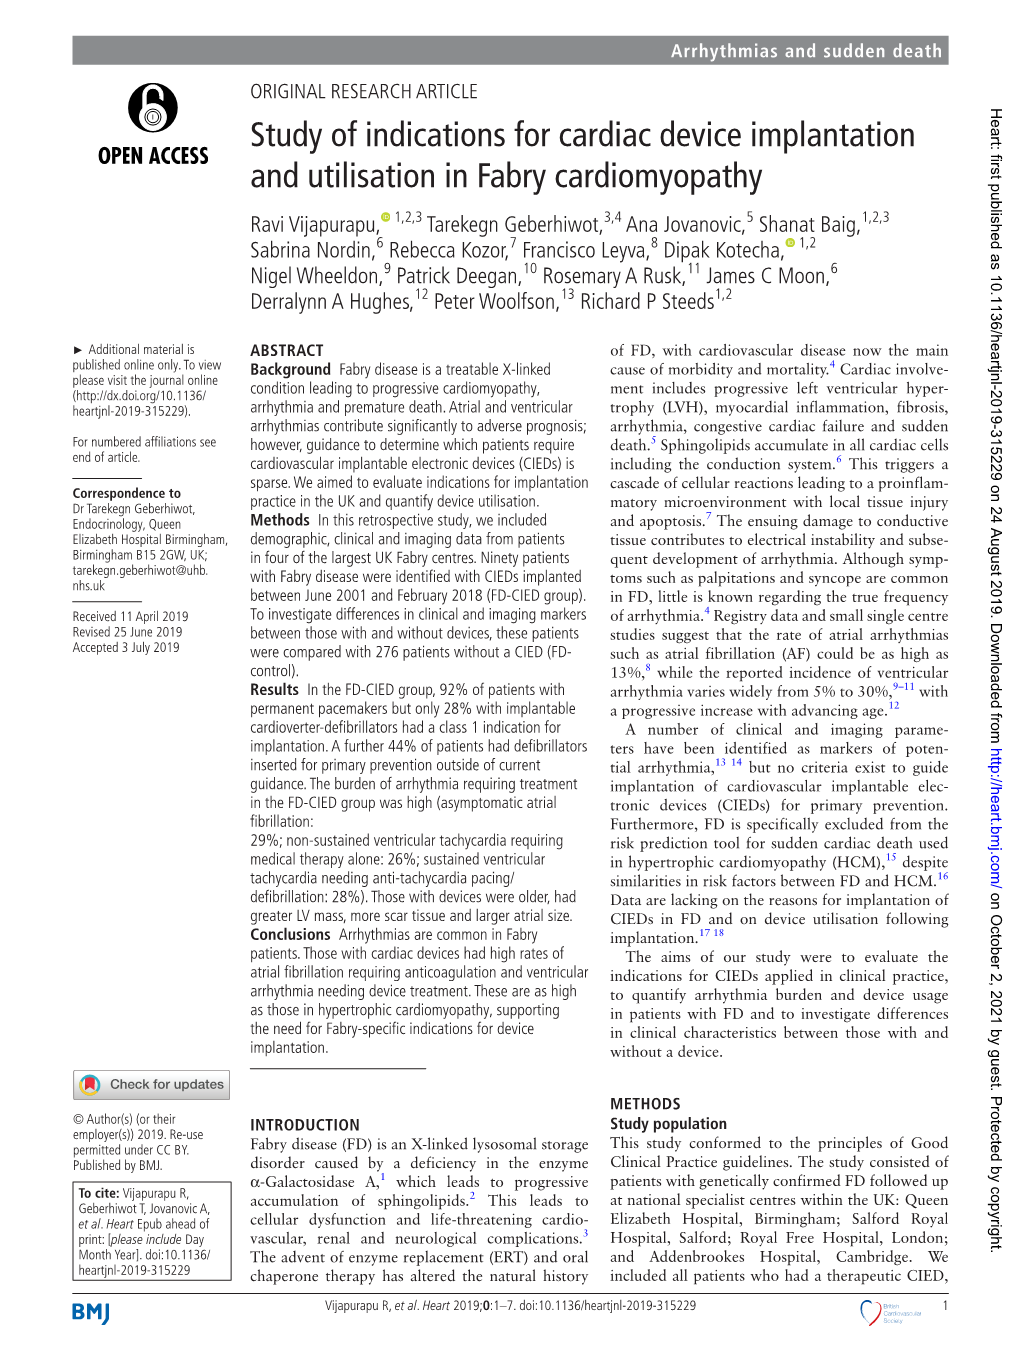 Study of Indications for Cardiac Device Implantation and Utilisation in Fabry